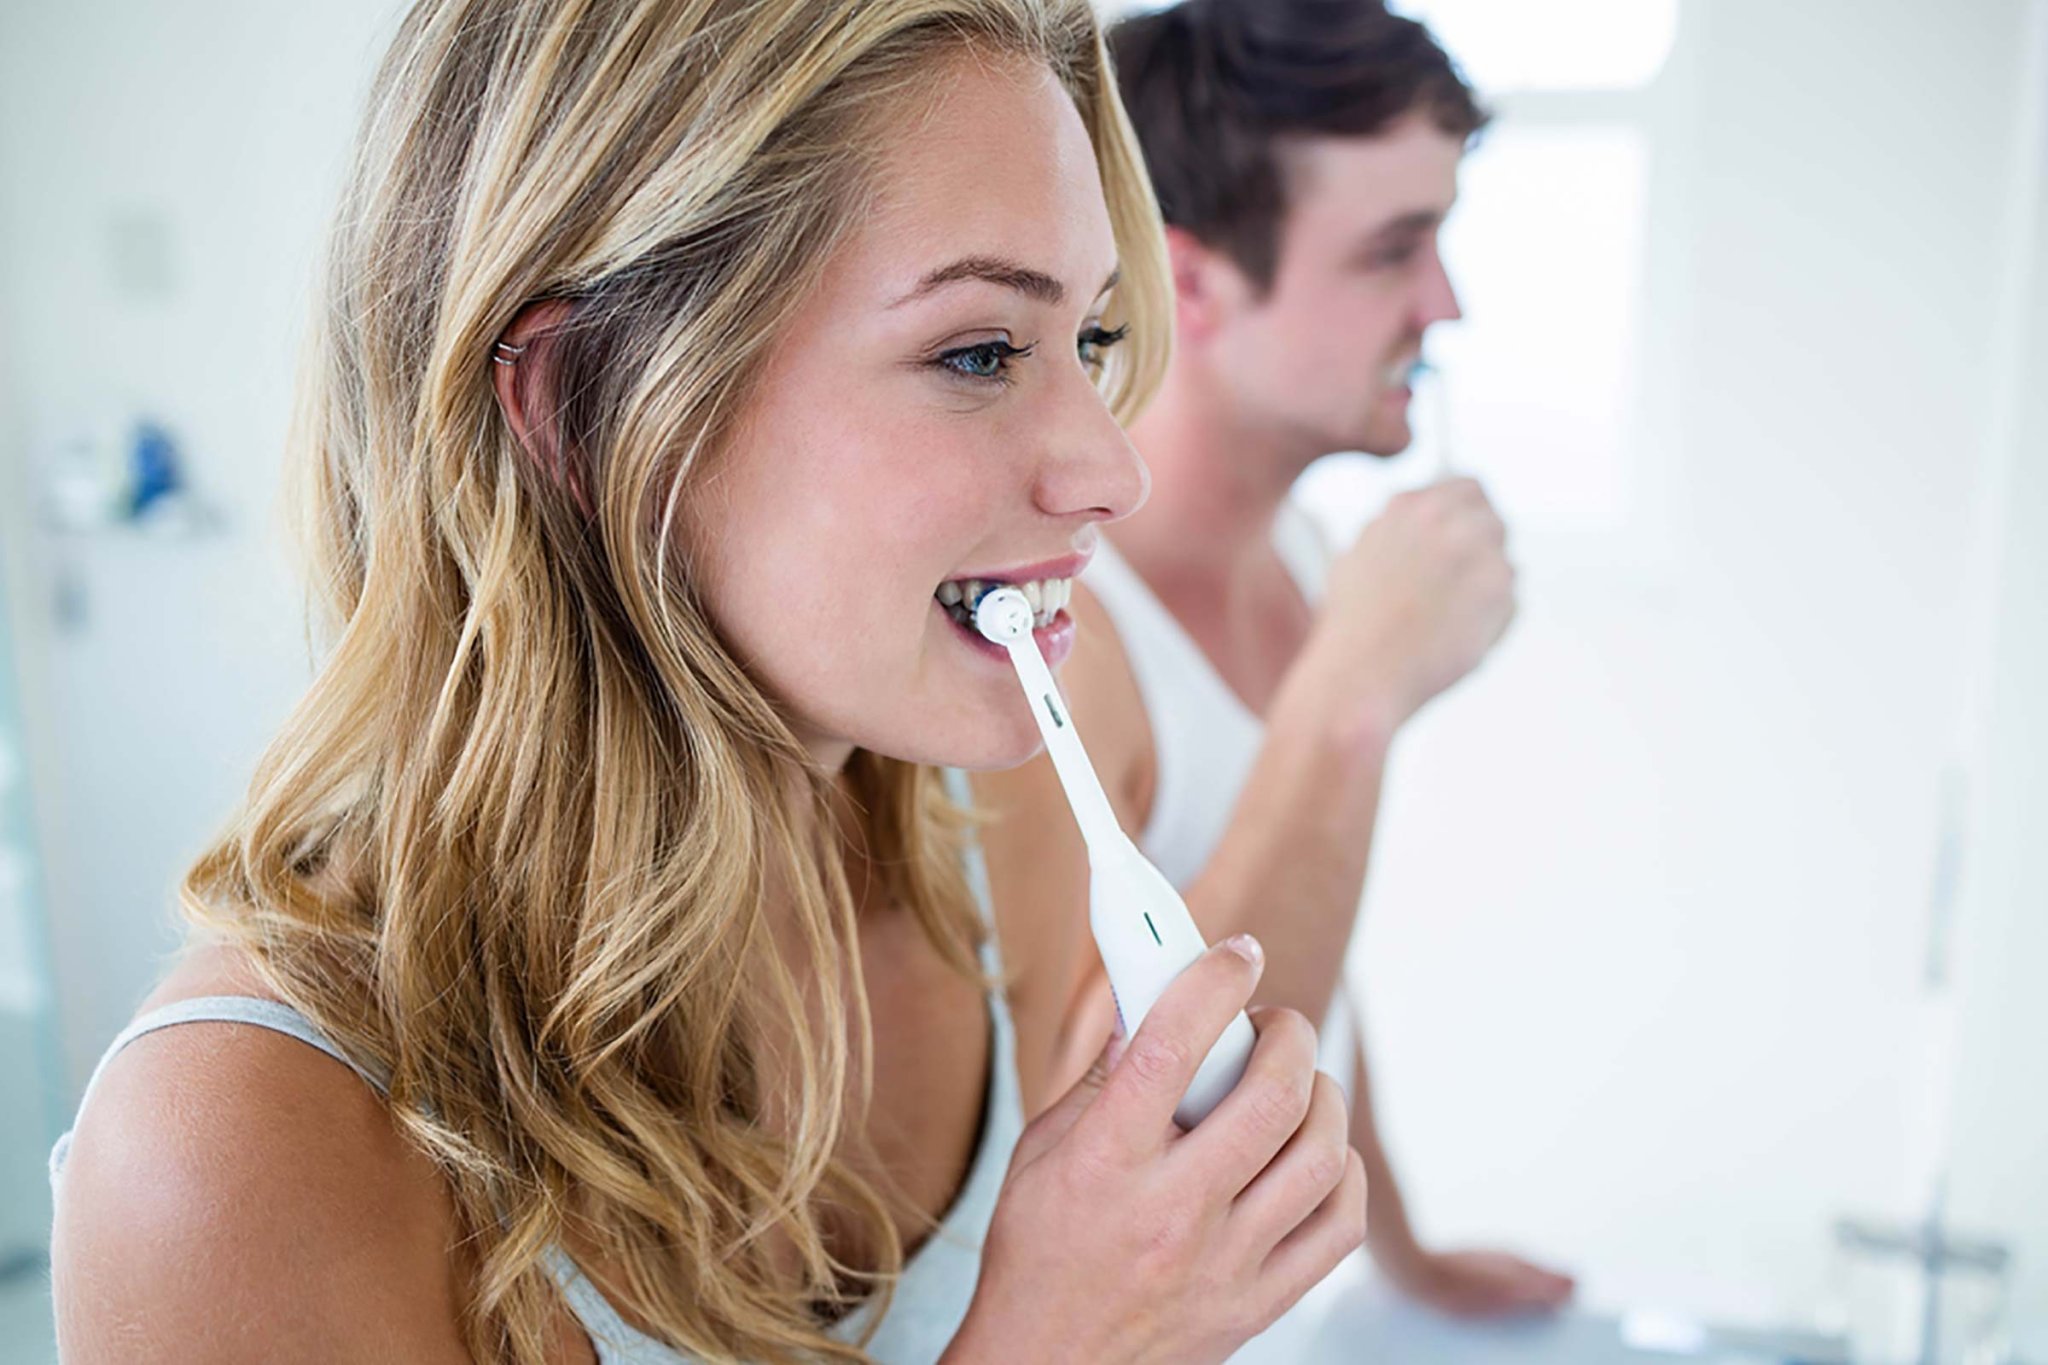 7 “Healthy” Habits You Didn’t Realize Were Damaging Your Teeth